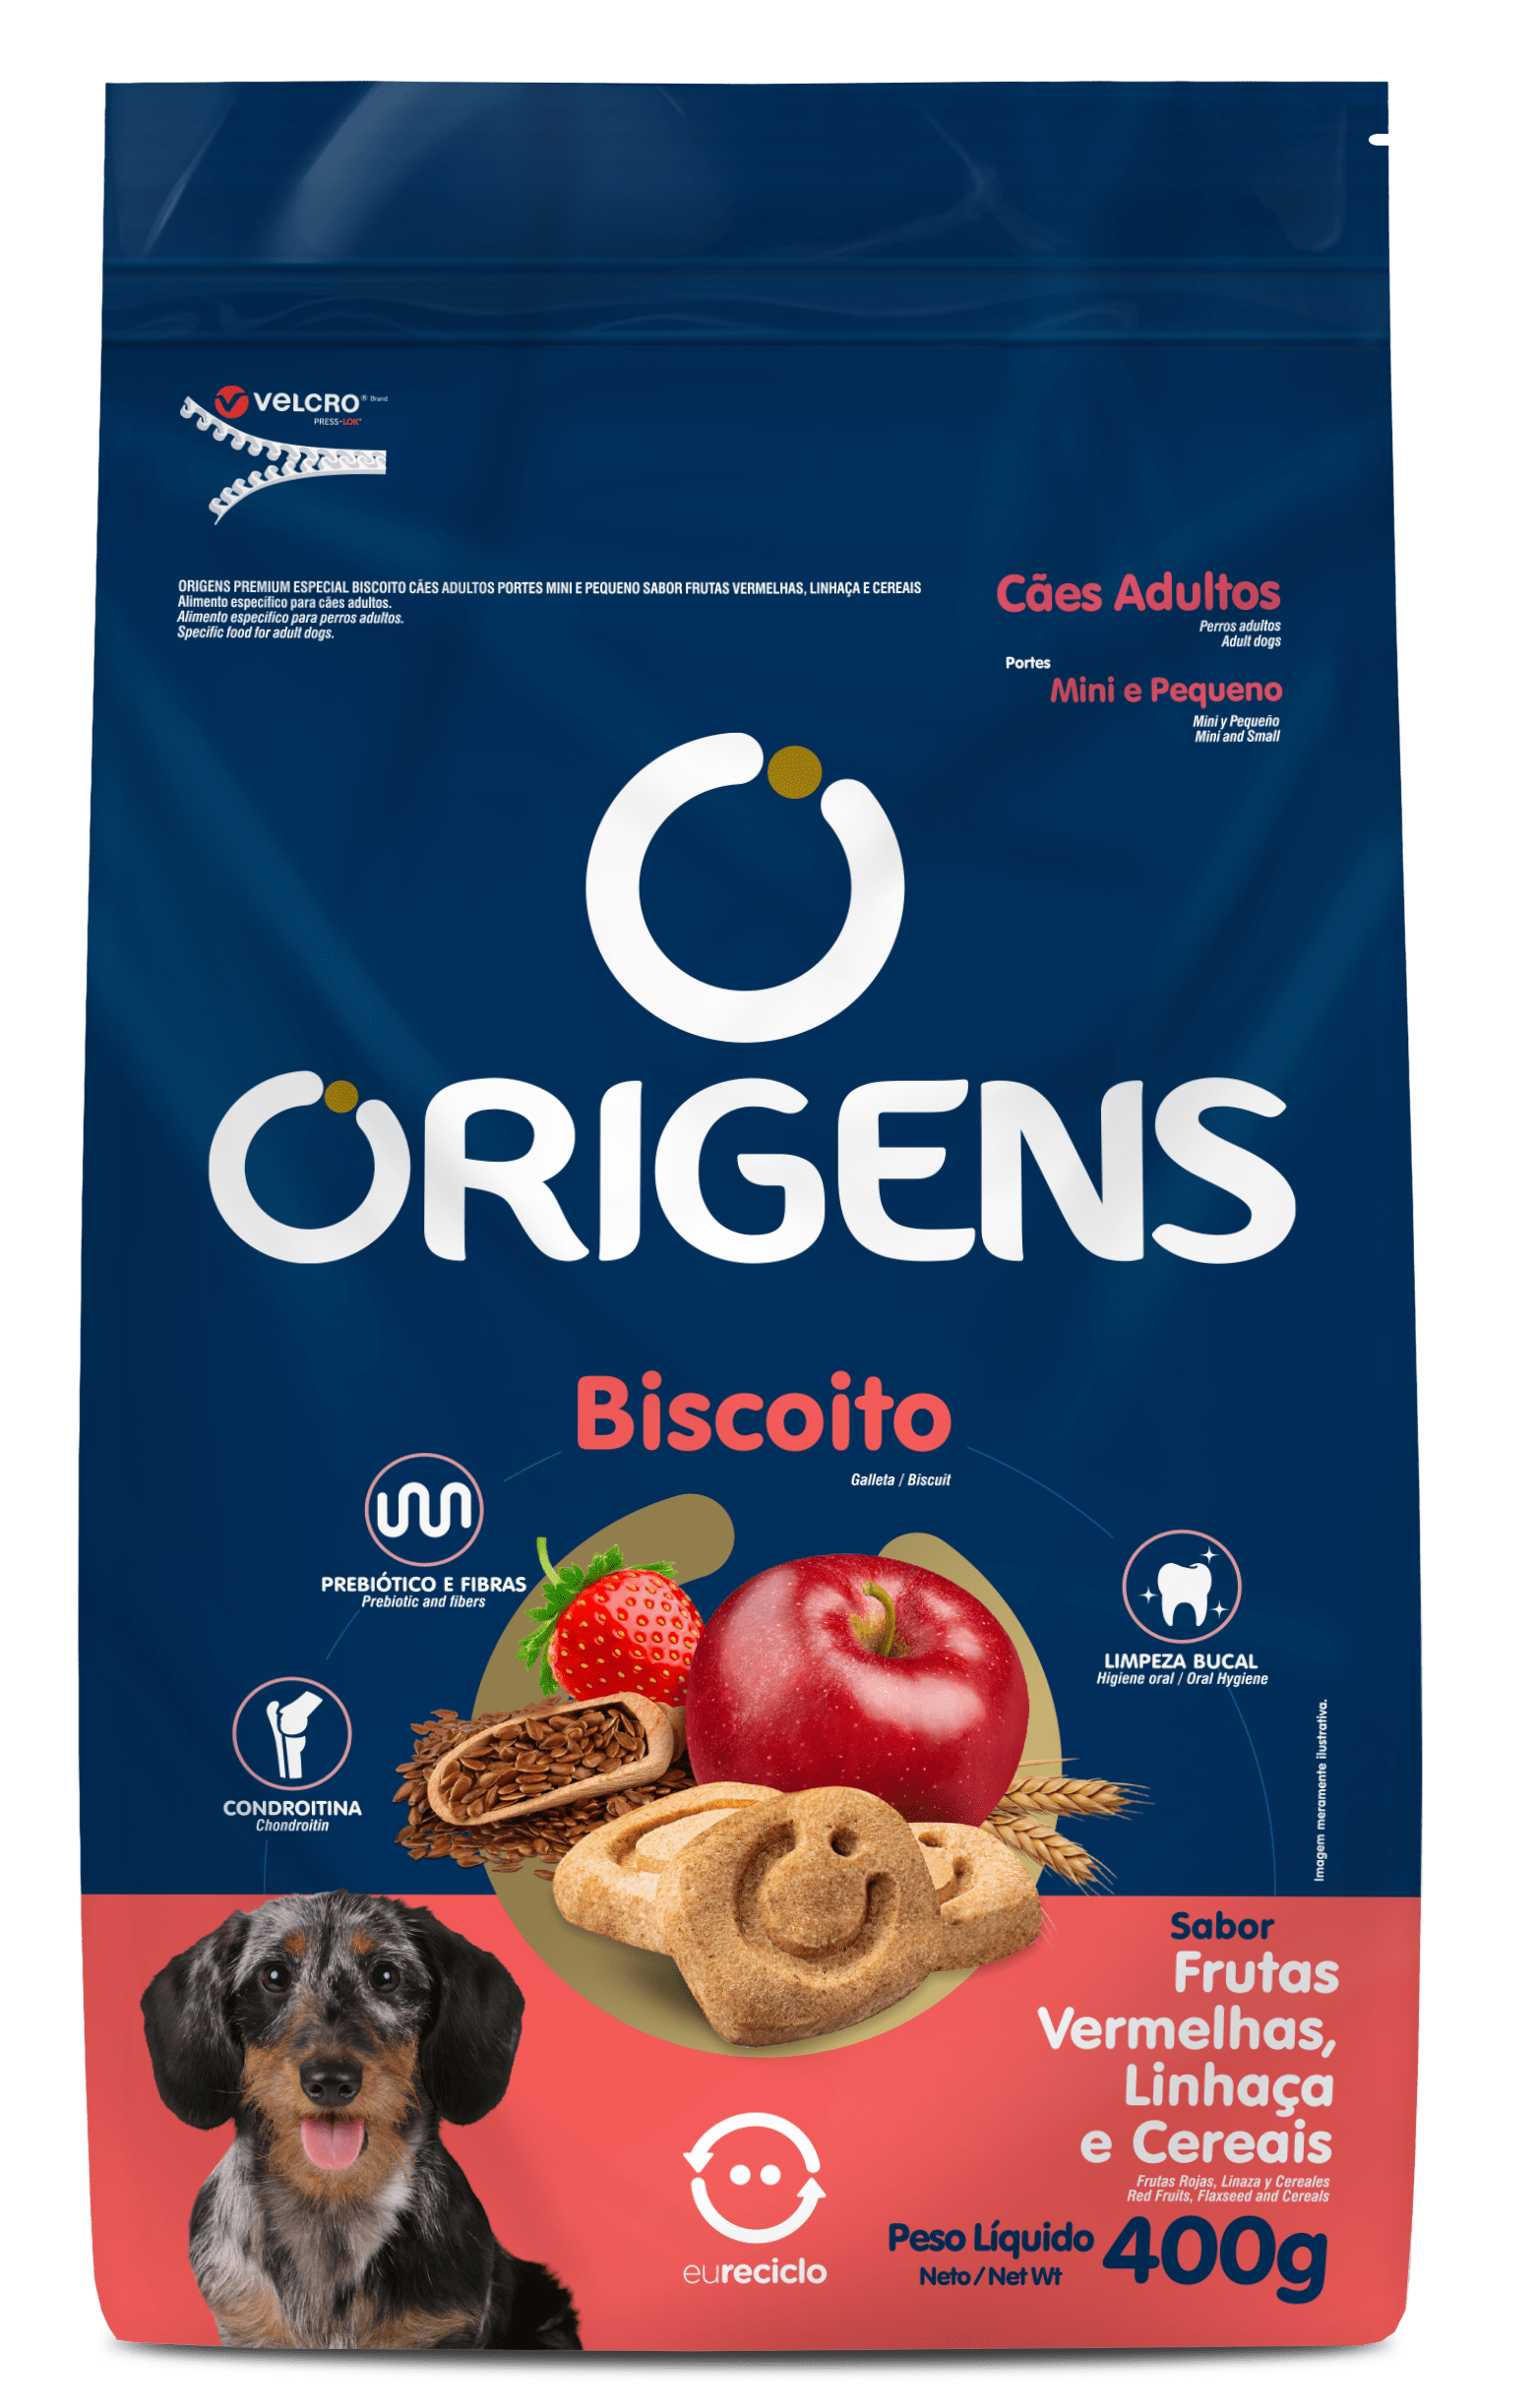 Origens Premium Especial Biscuit Adult Dogs Mini and Small Breeds Red Fruits, Flaxseed and Cereals Flavor